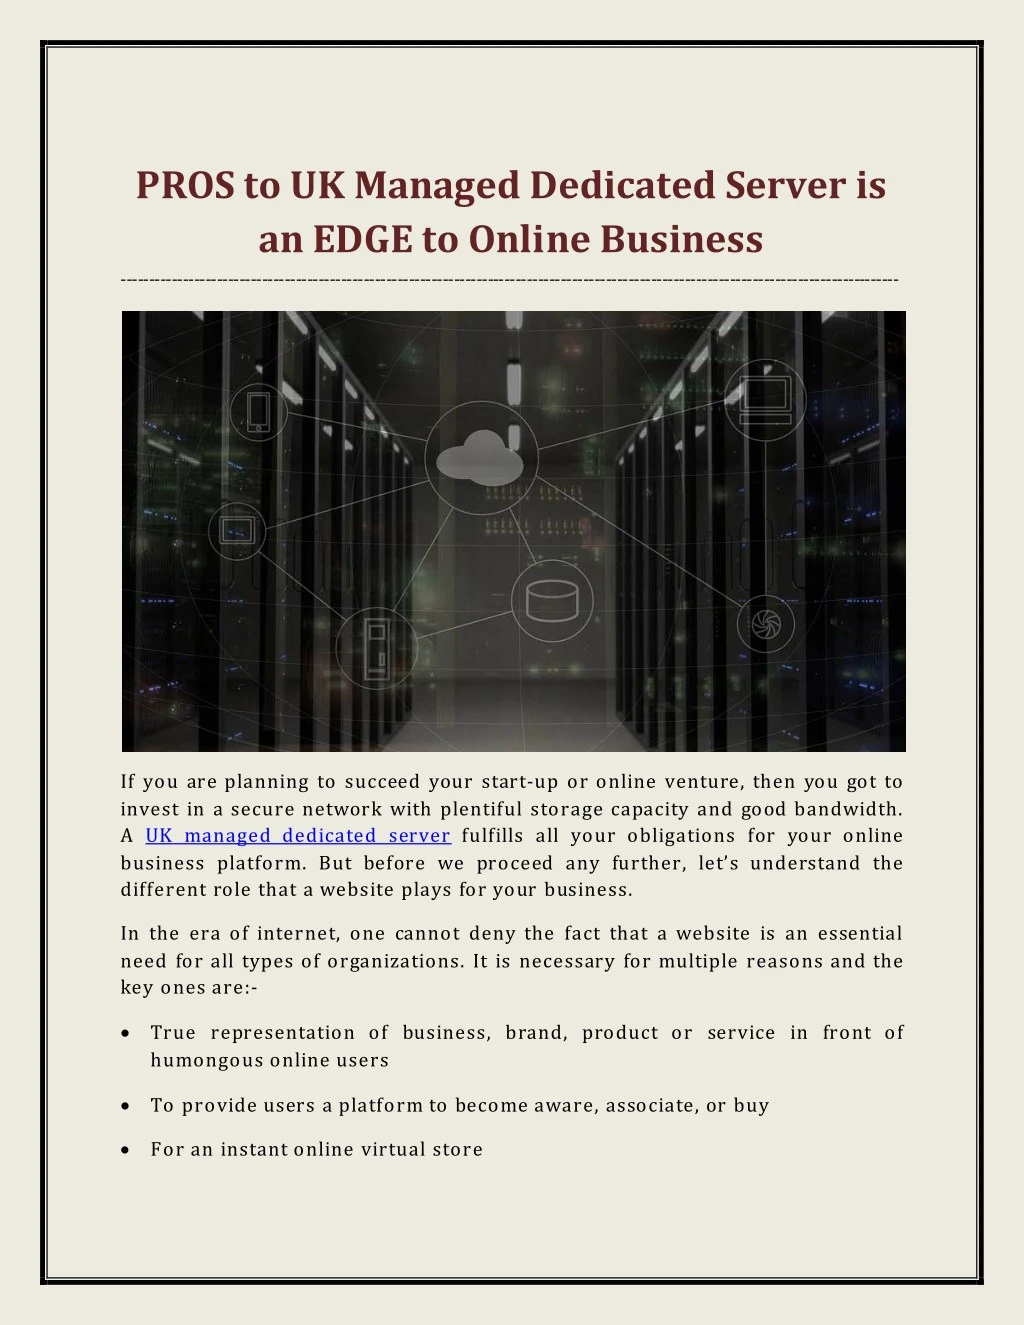 pros to uk managed dedicated server is an edge